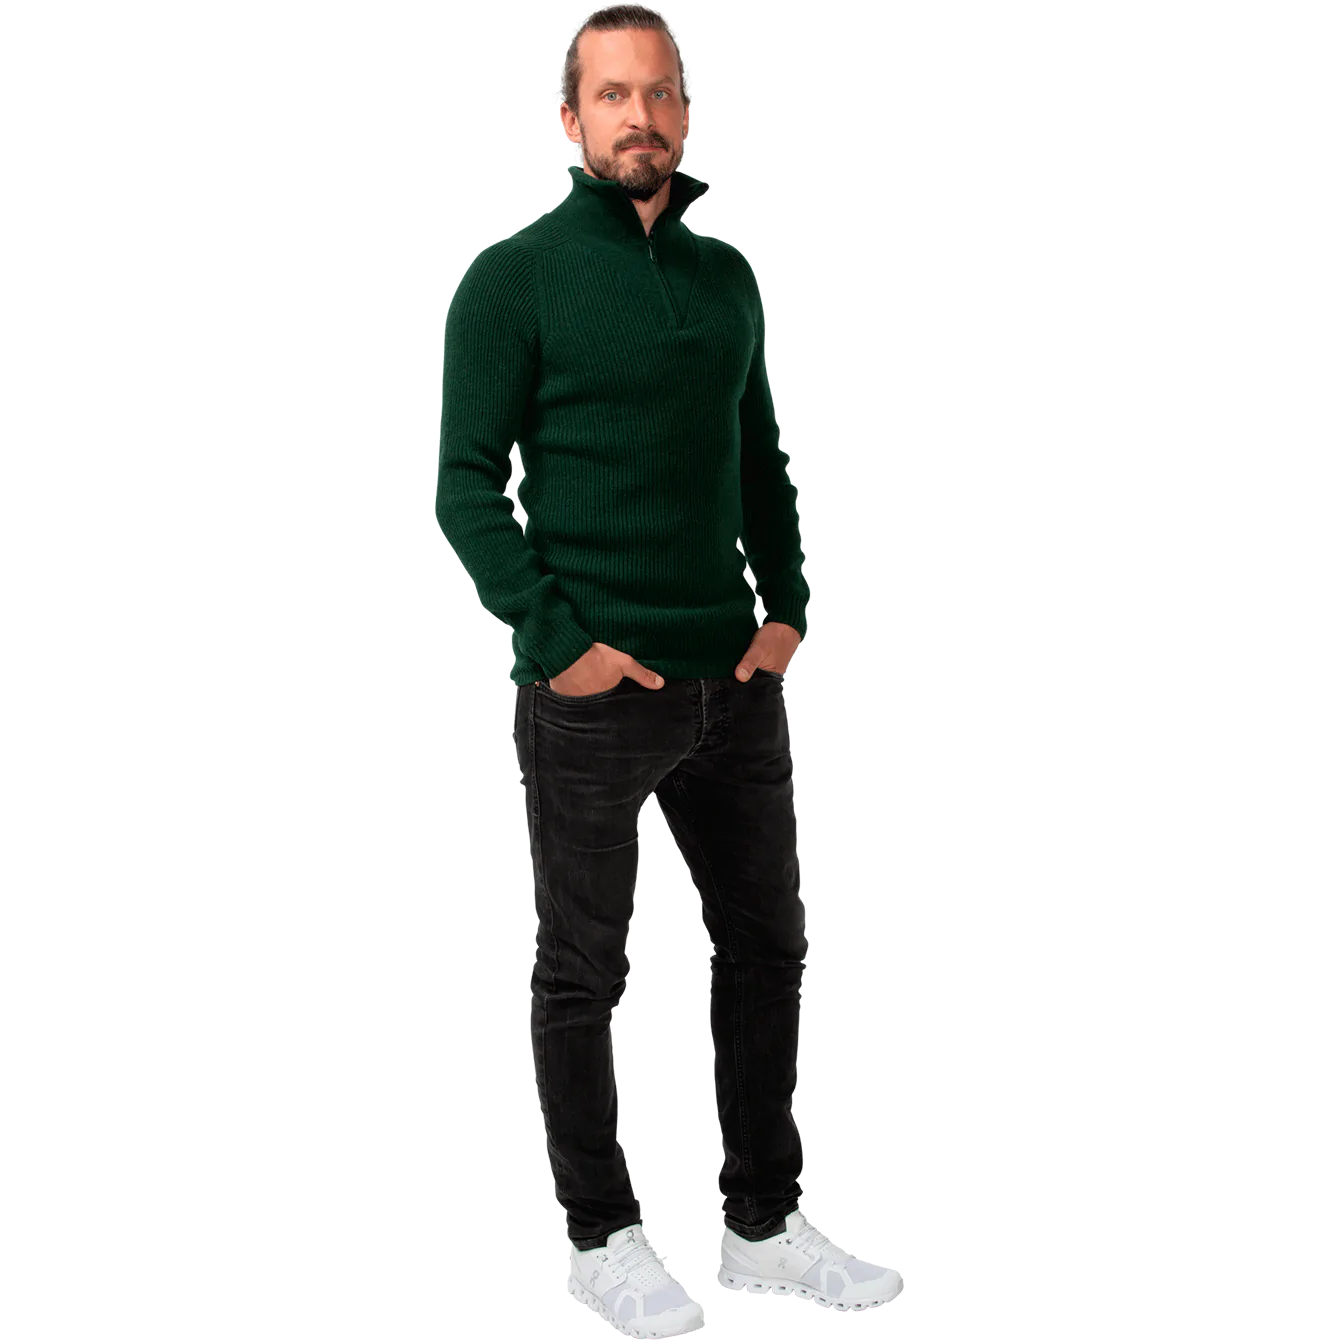 north-outdoor-madeinfinland-metso-m-pullover-forest-green-pose-4-front-fw19-n11703v01_1800x1800